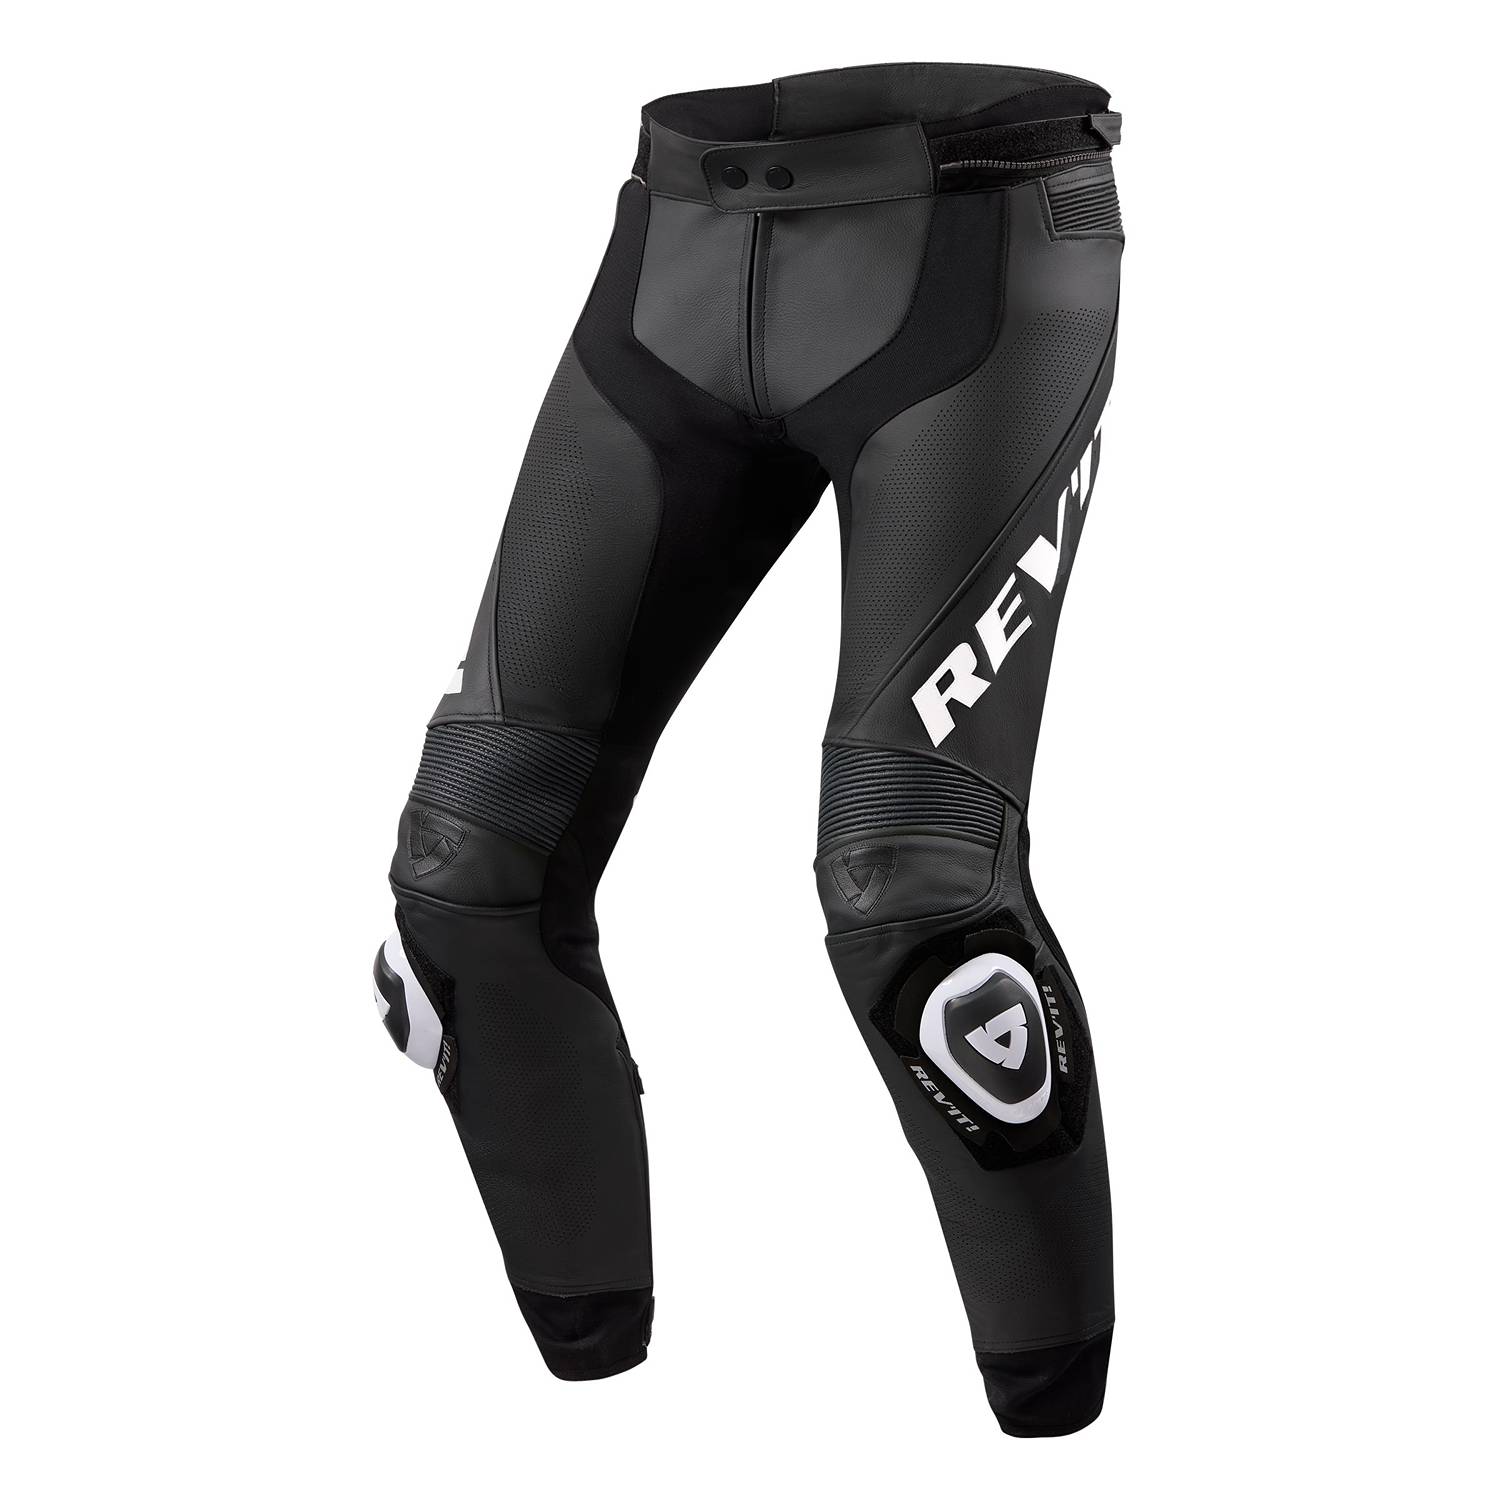 Image of REV'IT! Trousers Apex Black White Long Motorcycle Pants Size 54 ID 8700001315777